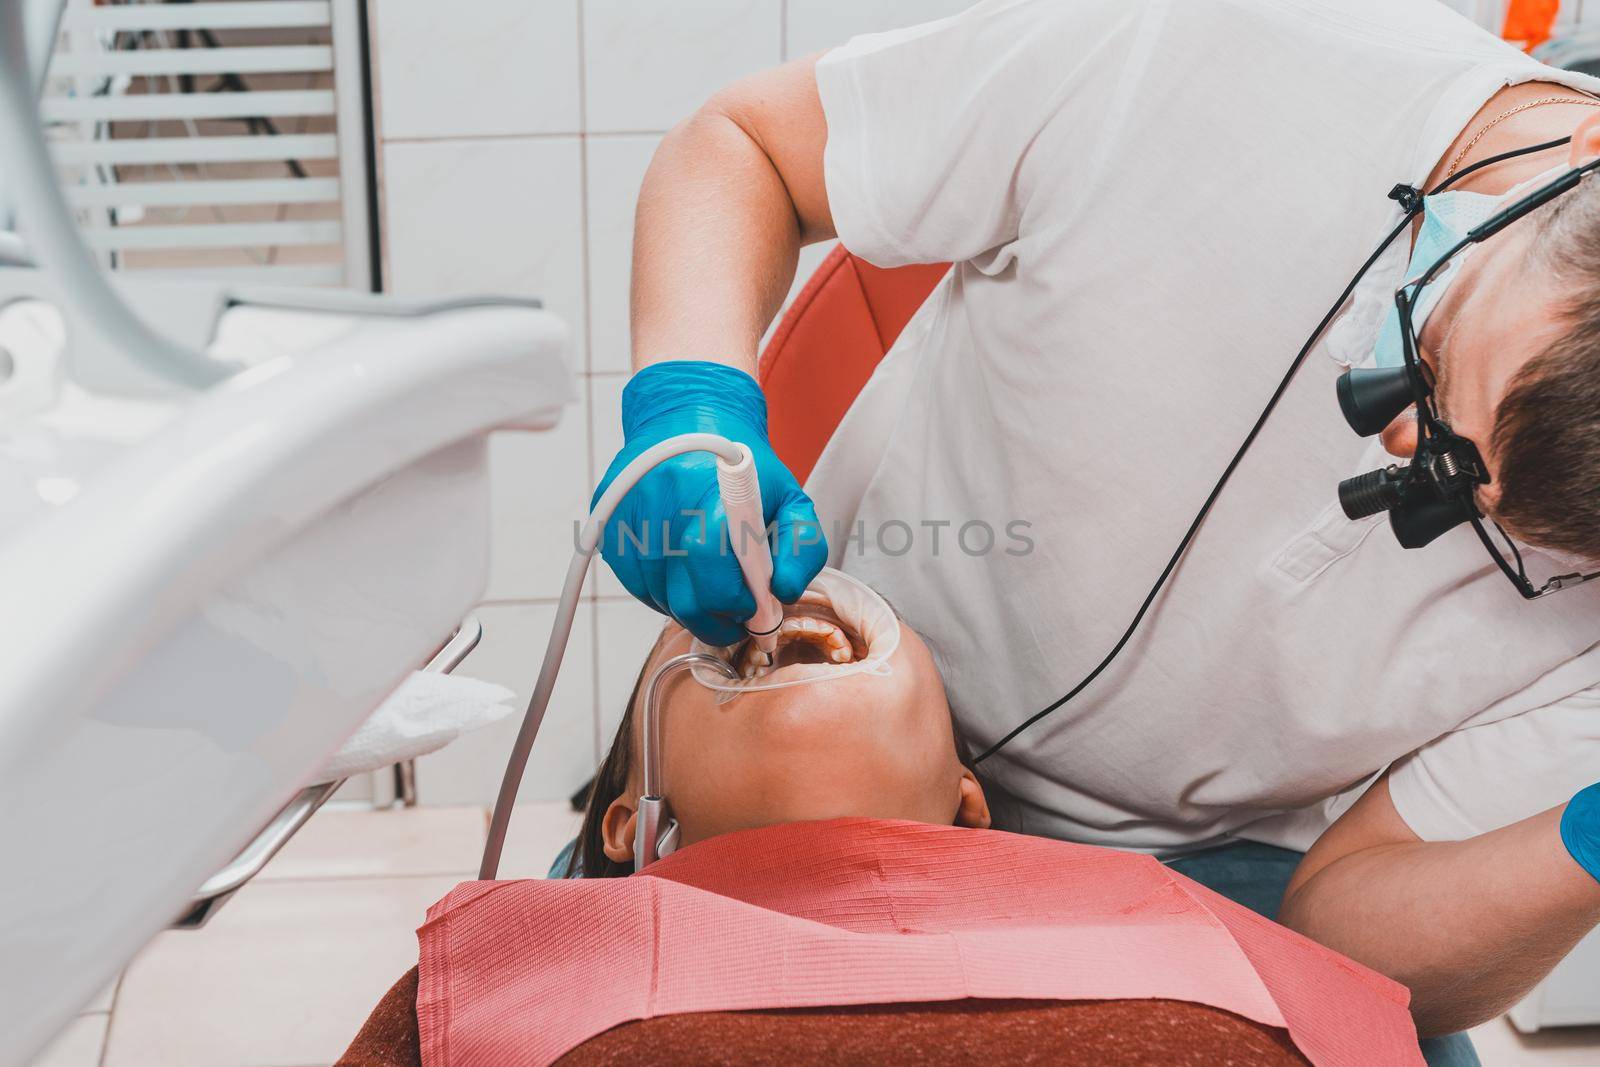 The dentist uses a scaler to remove tartar, oral hygiene.2020